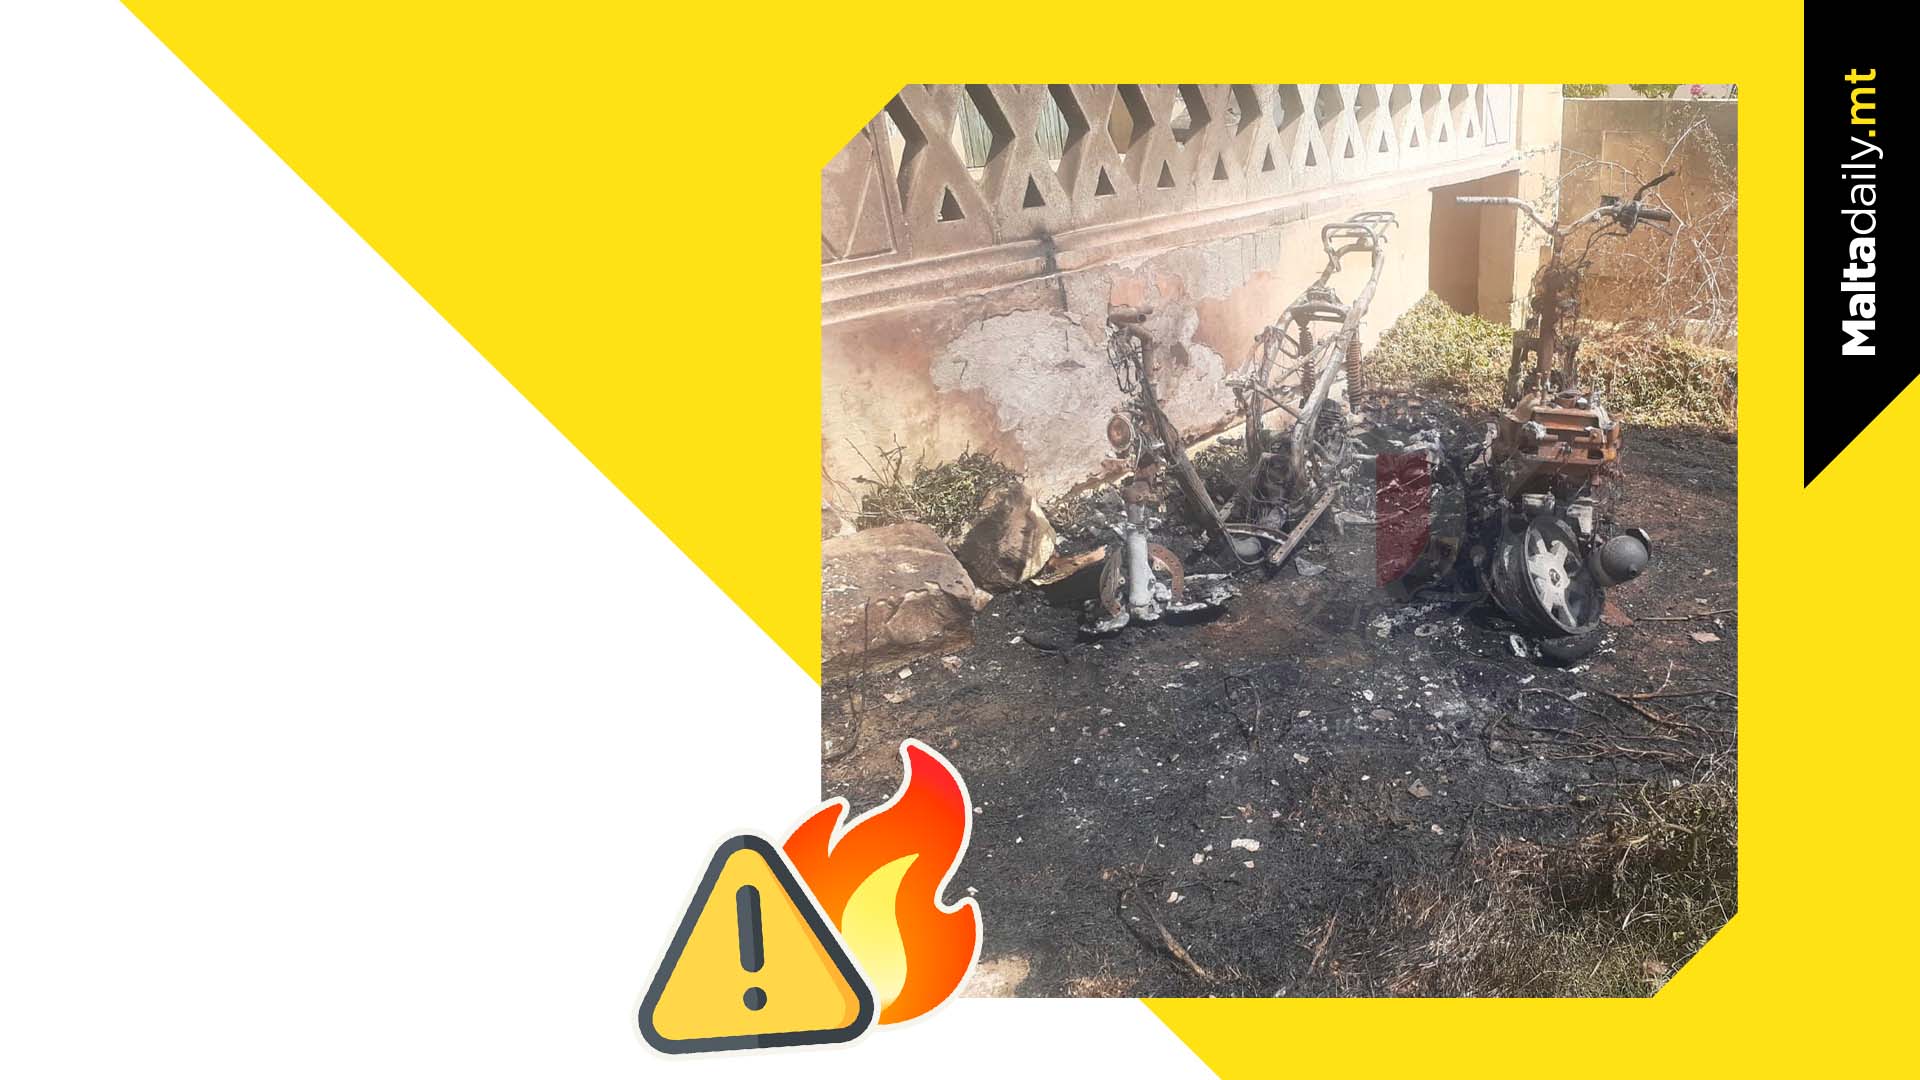 20 Year Old Admits To Burning 2 Motorcycles In Nadur